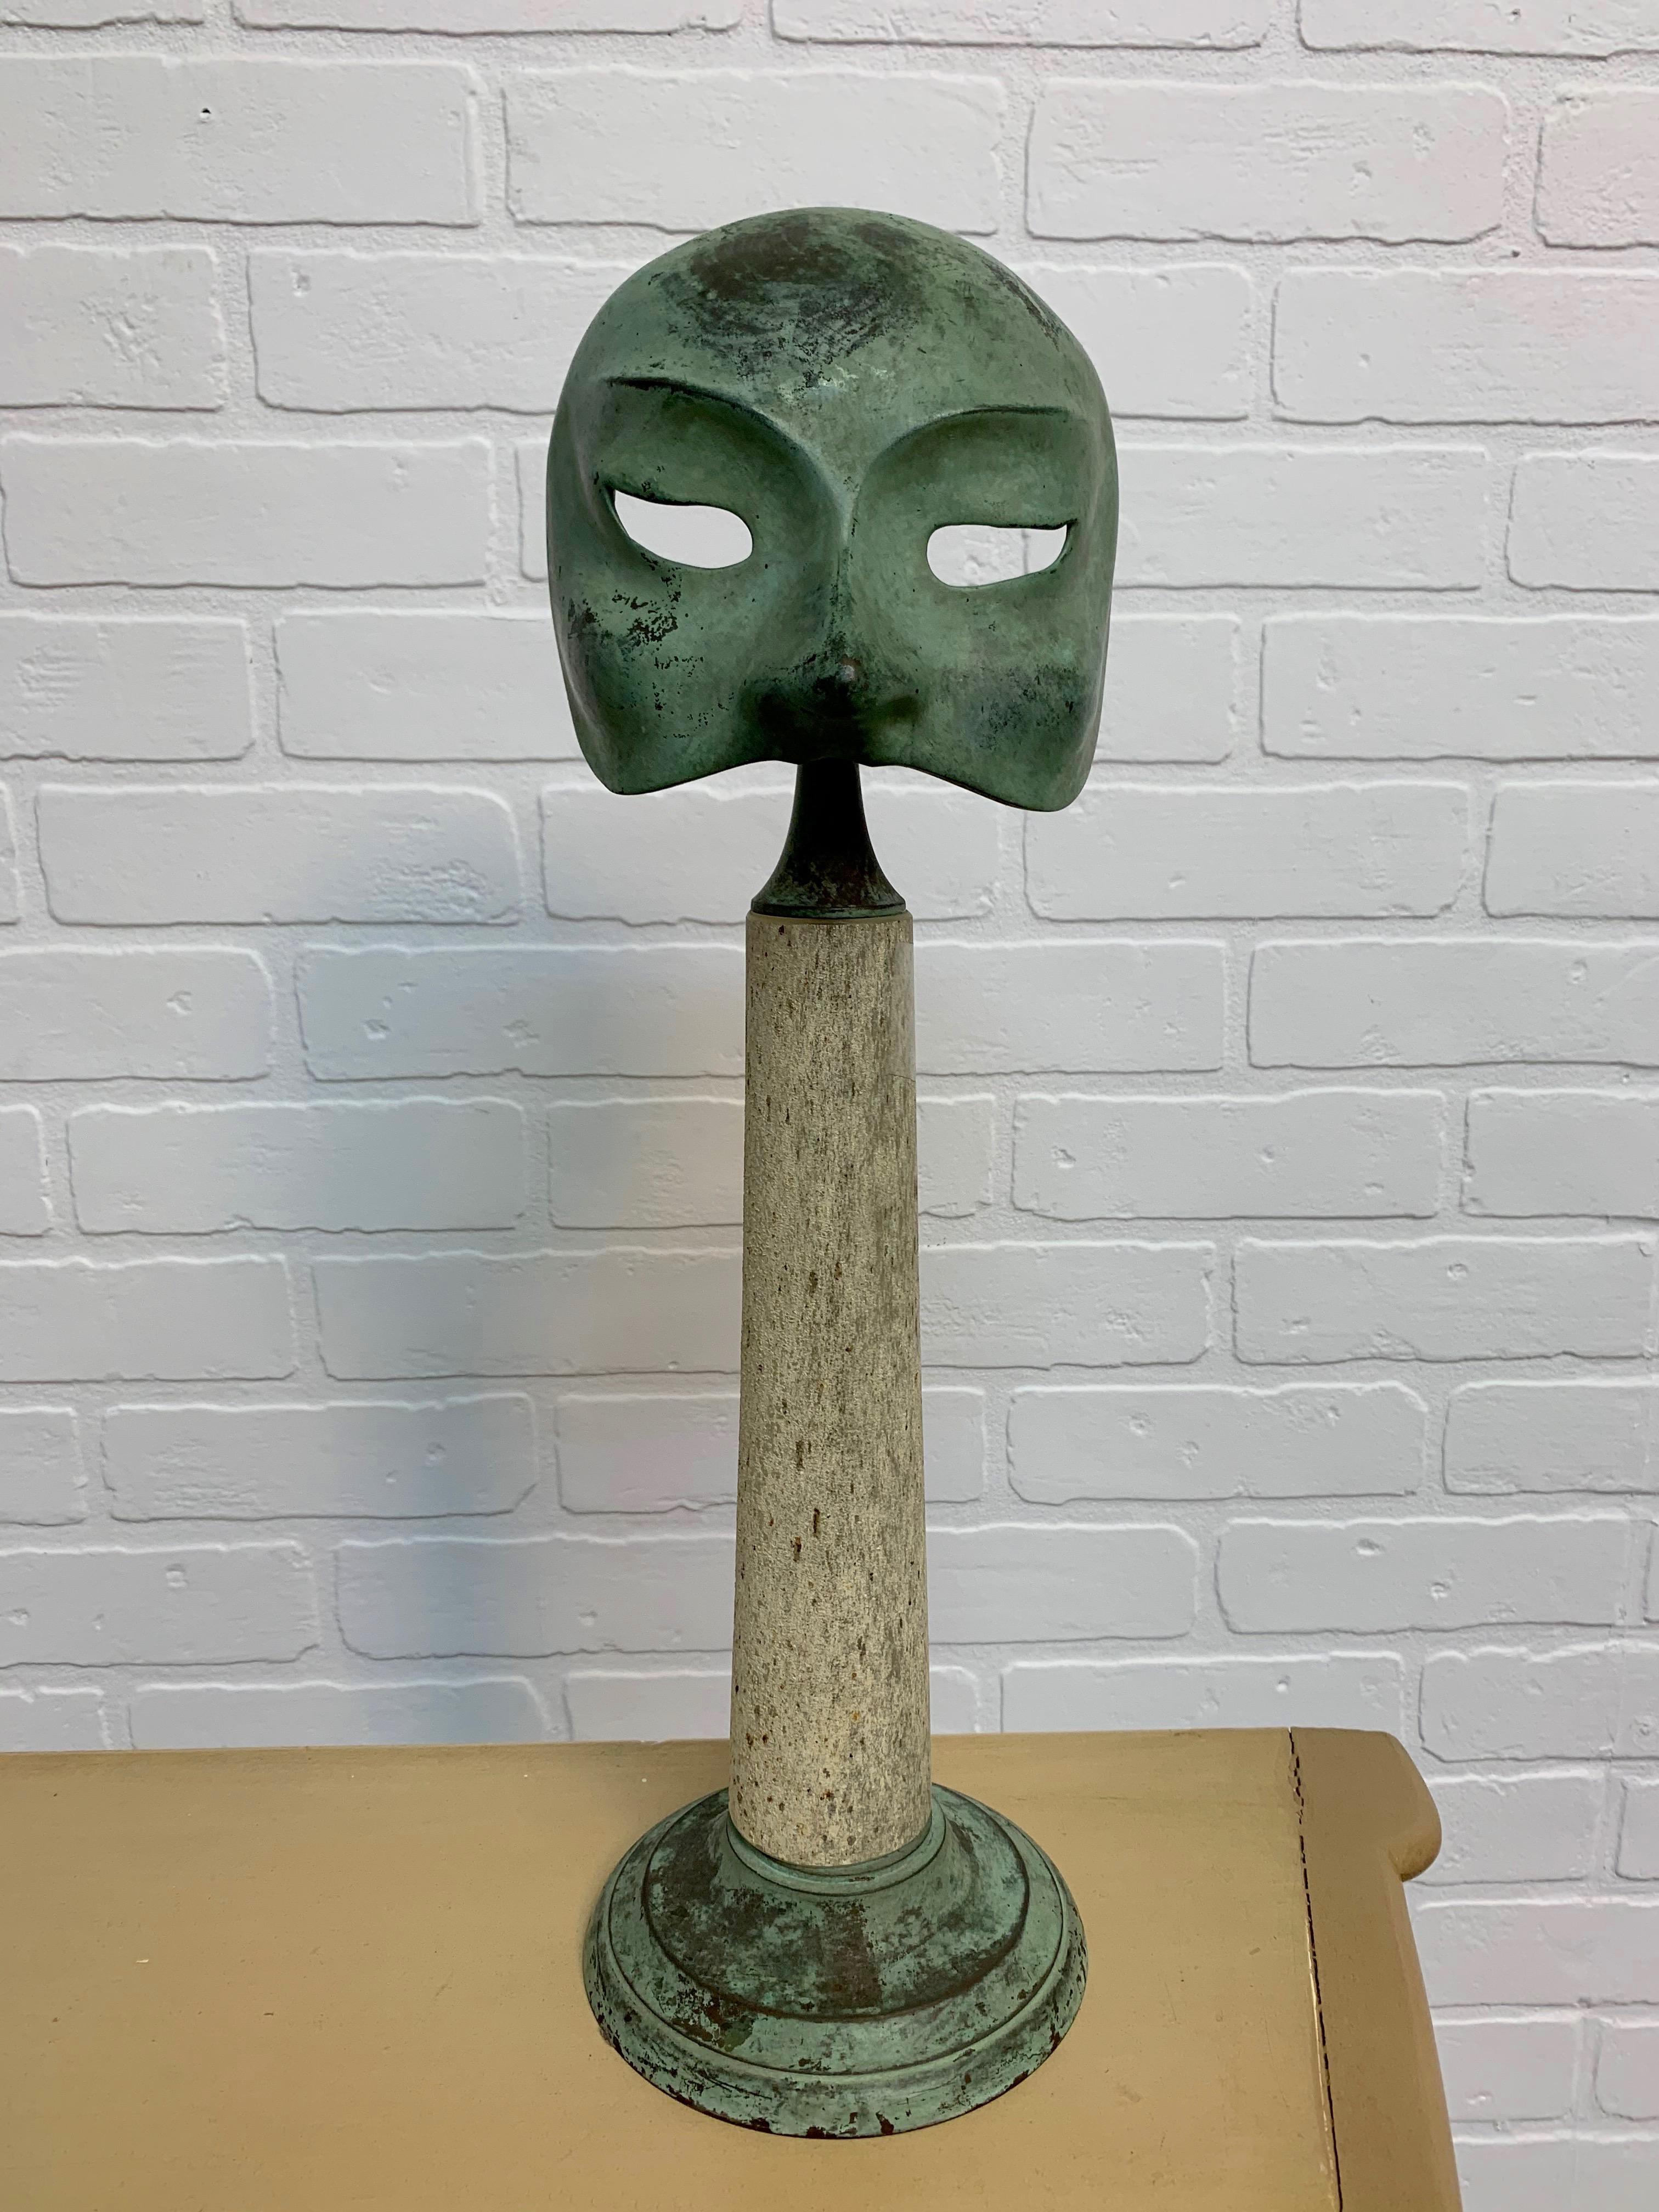 Theater mask table lamp designed by Elin Raaberg Nielsen for Seguso Vetri d’Arte from the “Le Maschere” series. All pieces were crafted during the 1970s in Murano, Italy in antique patinated bronze.

 
 